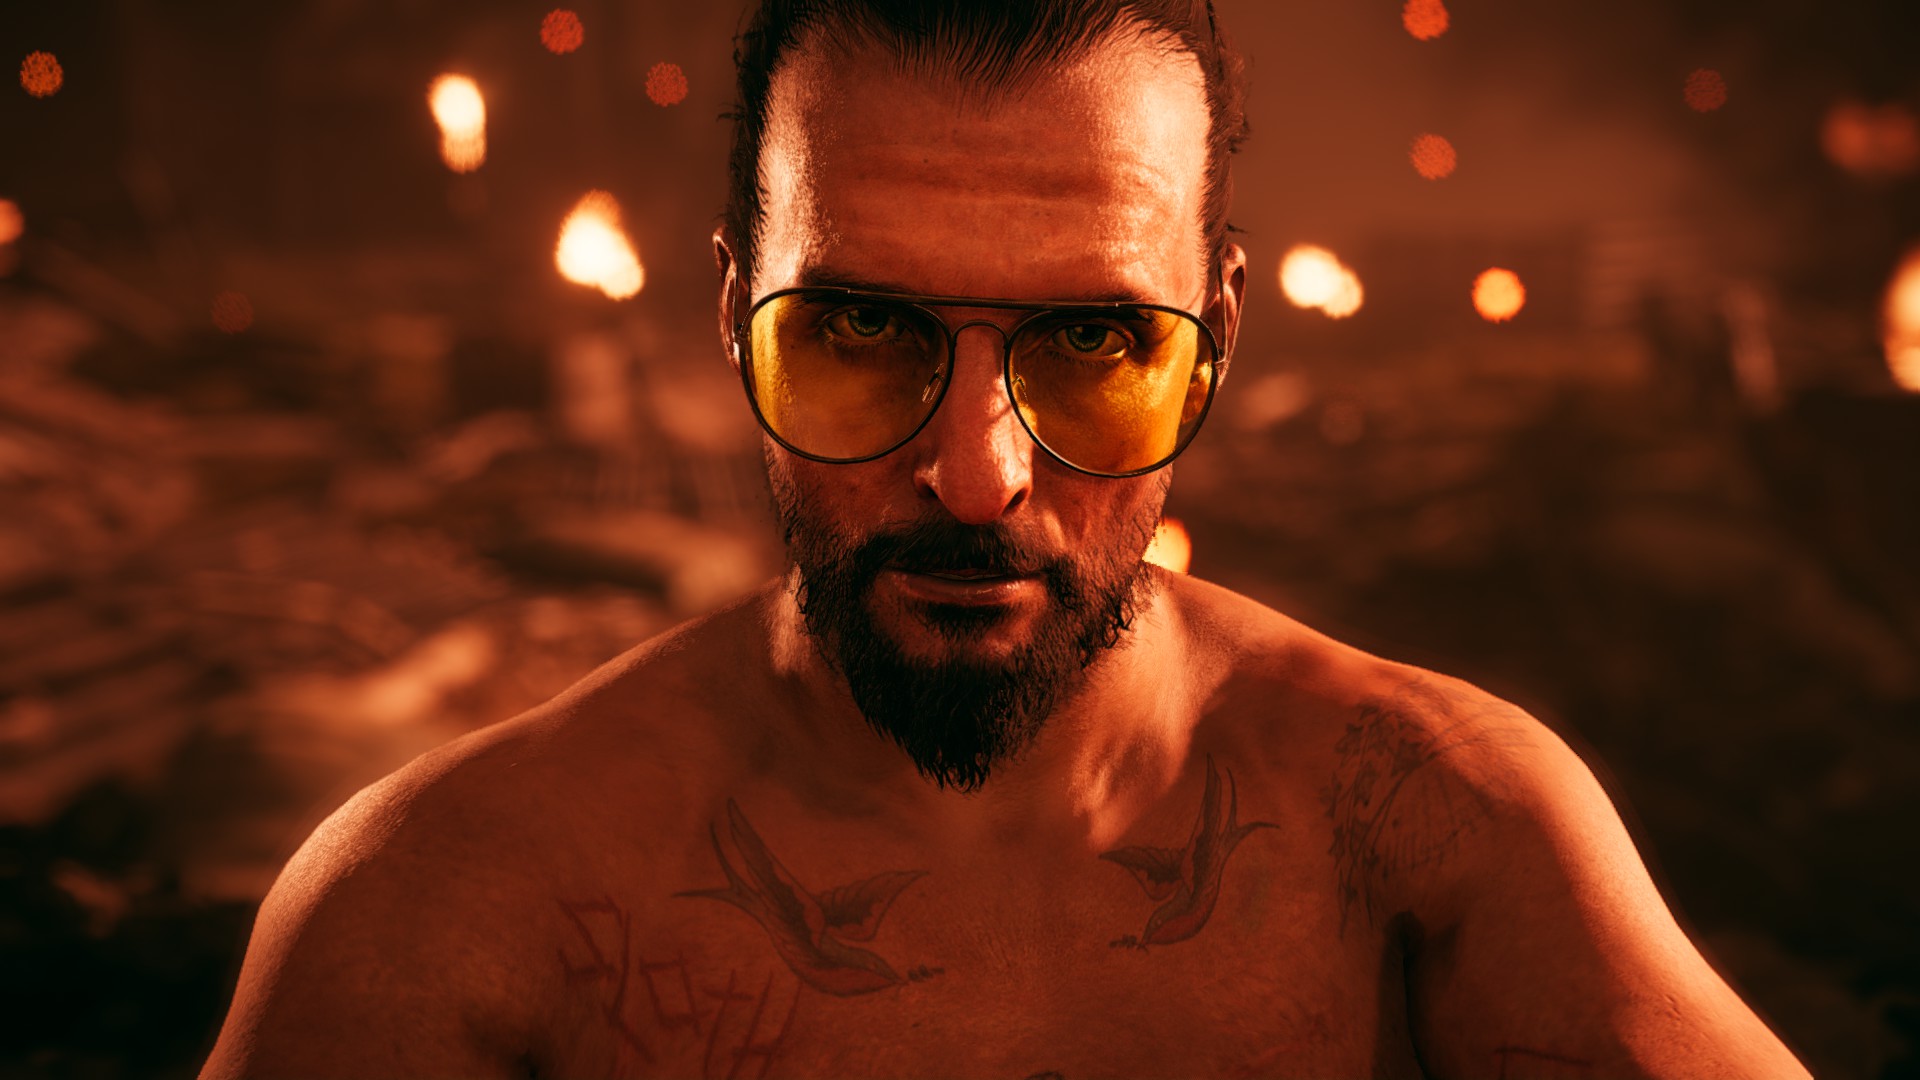 Far Cry 5 - Will Joseph Seed Be The Best Bad Guy? - Green Man Gaming Blog